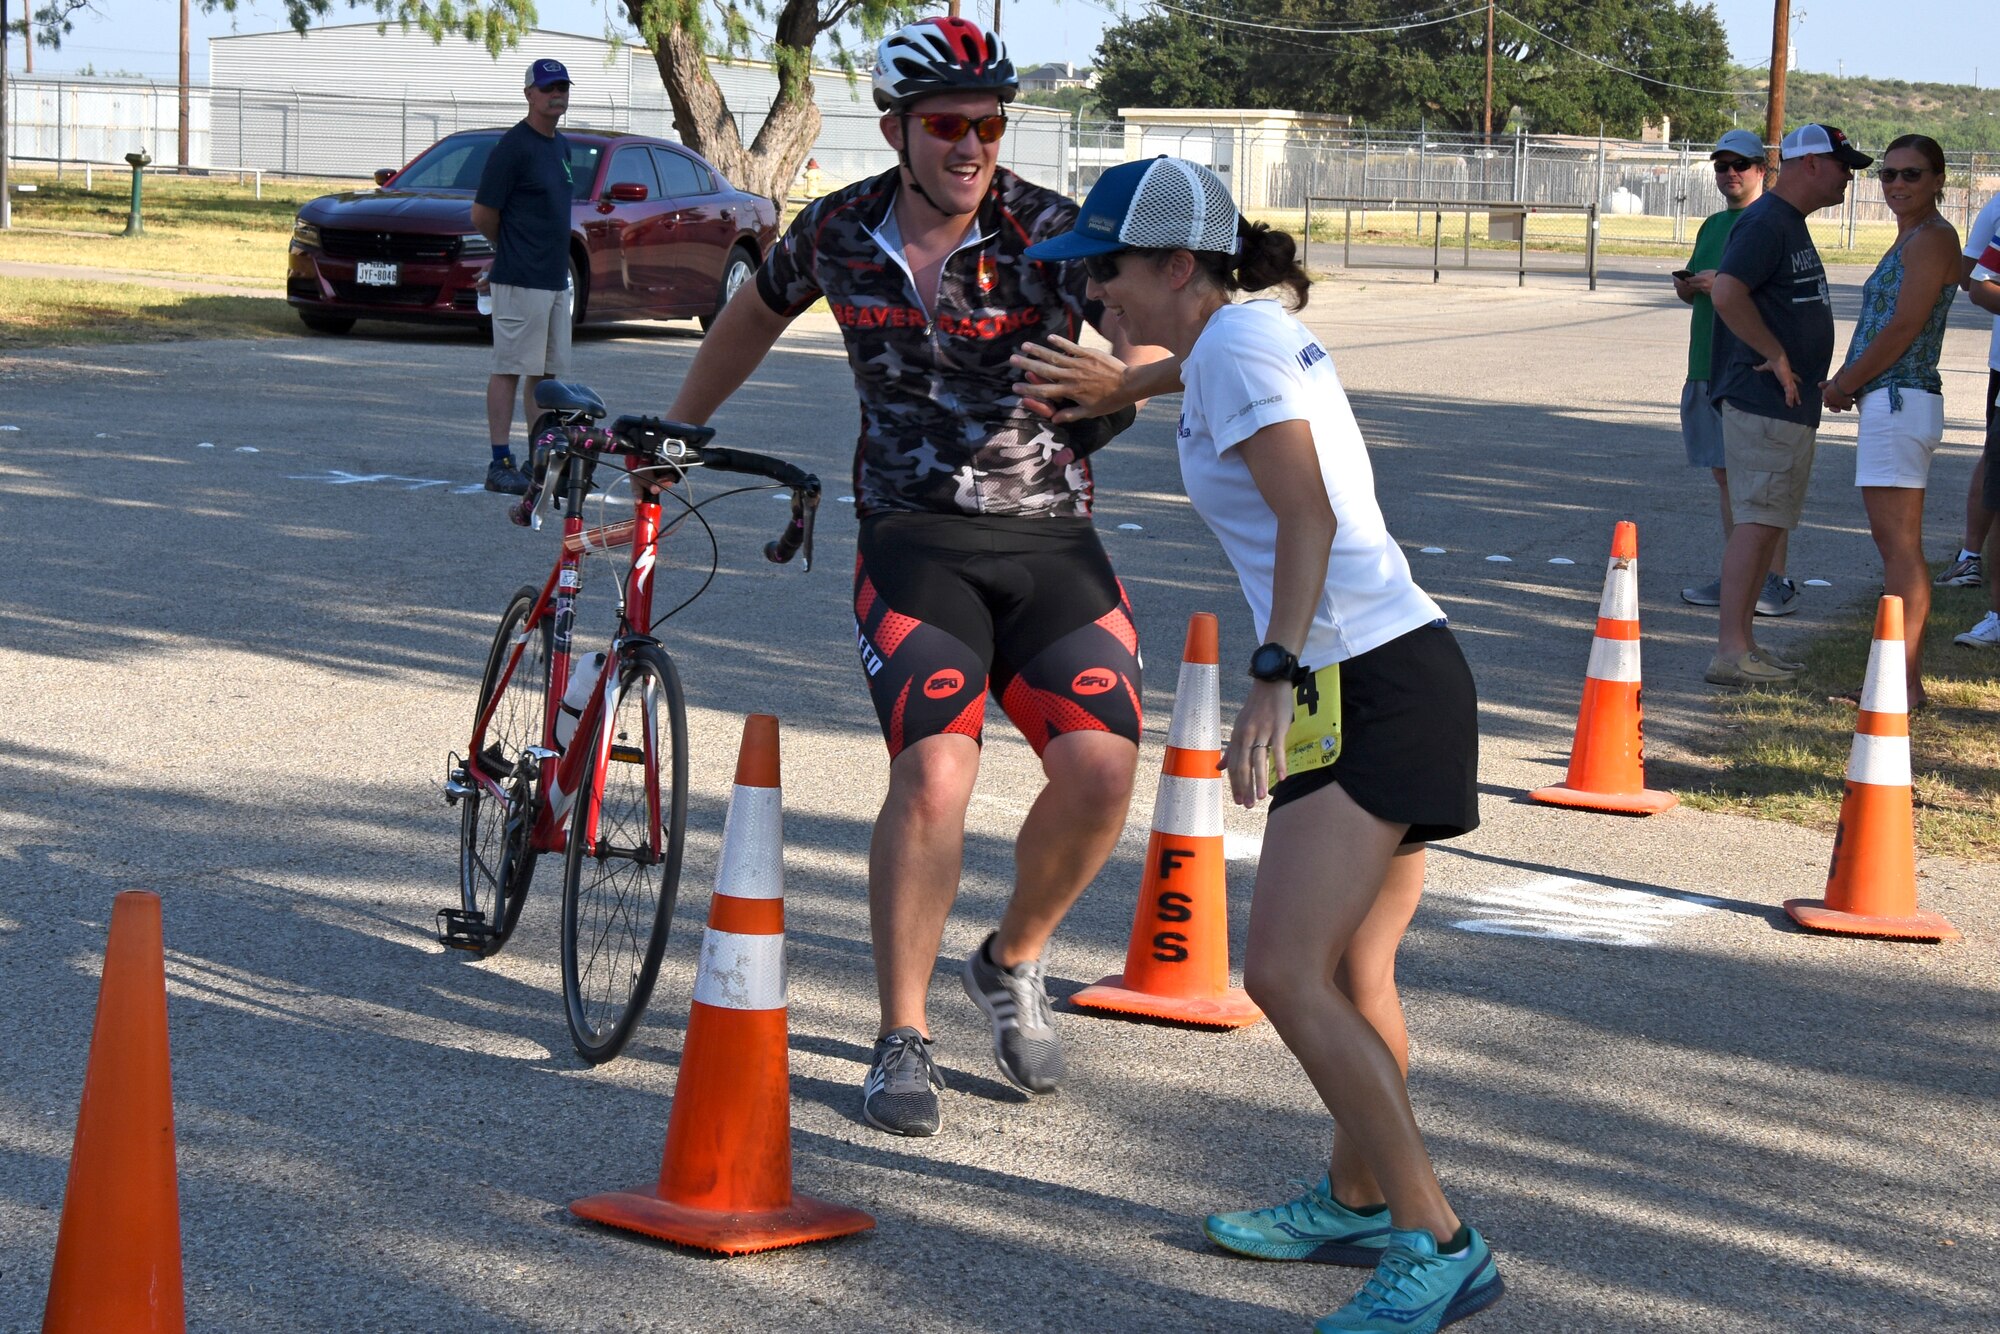 U.S. Air Force Senior Airman Danny Smith, 17th Medical Operations Squadron flight medical technician, tags his teammate Capt. Jennifer Henning, 17th MDOS flight surgeon, during the Goodfellow Annual Triathlon at the Goodfellow Air Force Base Recreation Camp San Angelo, Texas, July 28, 2018. The triathlon was open to members from Goodfellow and San allowing them to test their merit. (U.S. Air Force photo by Airman 1st Class Zachary Chapman/Released)